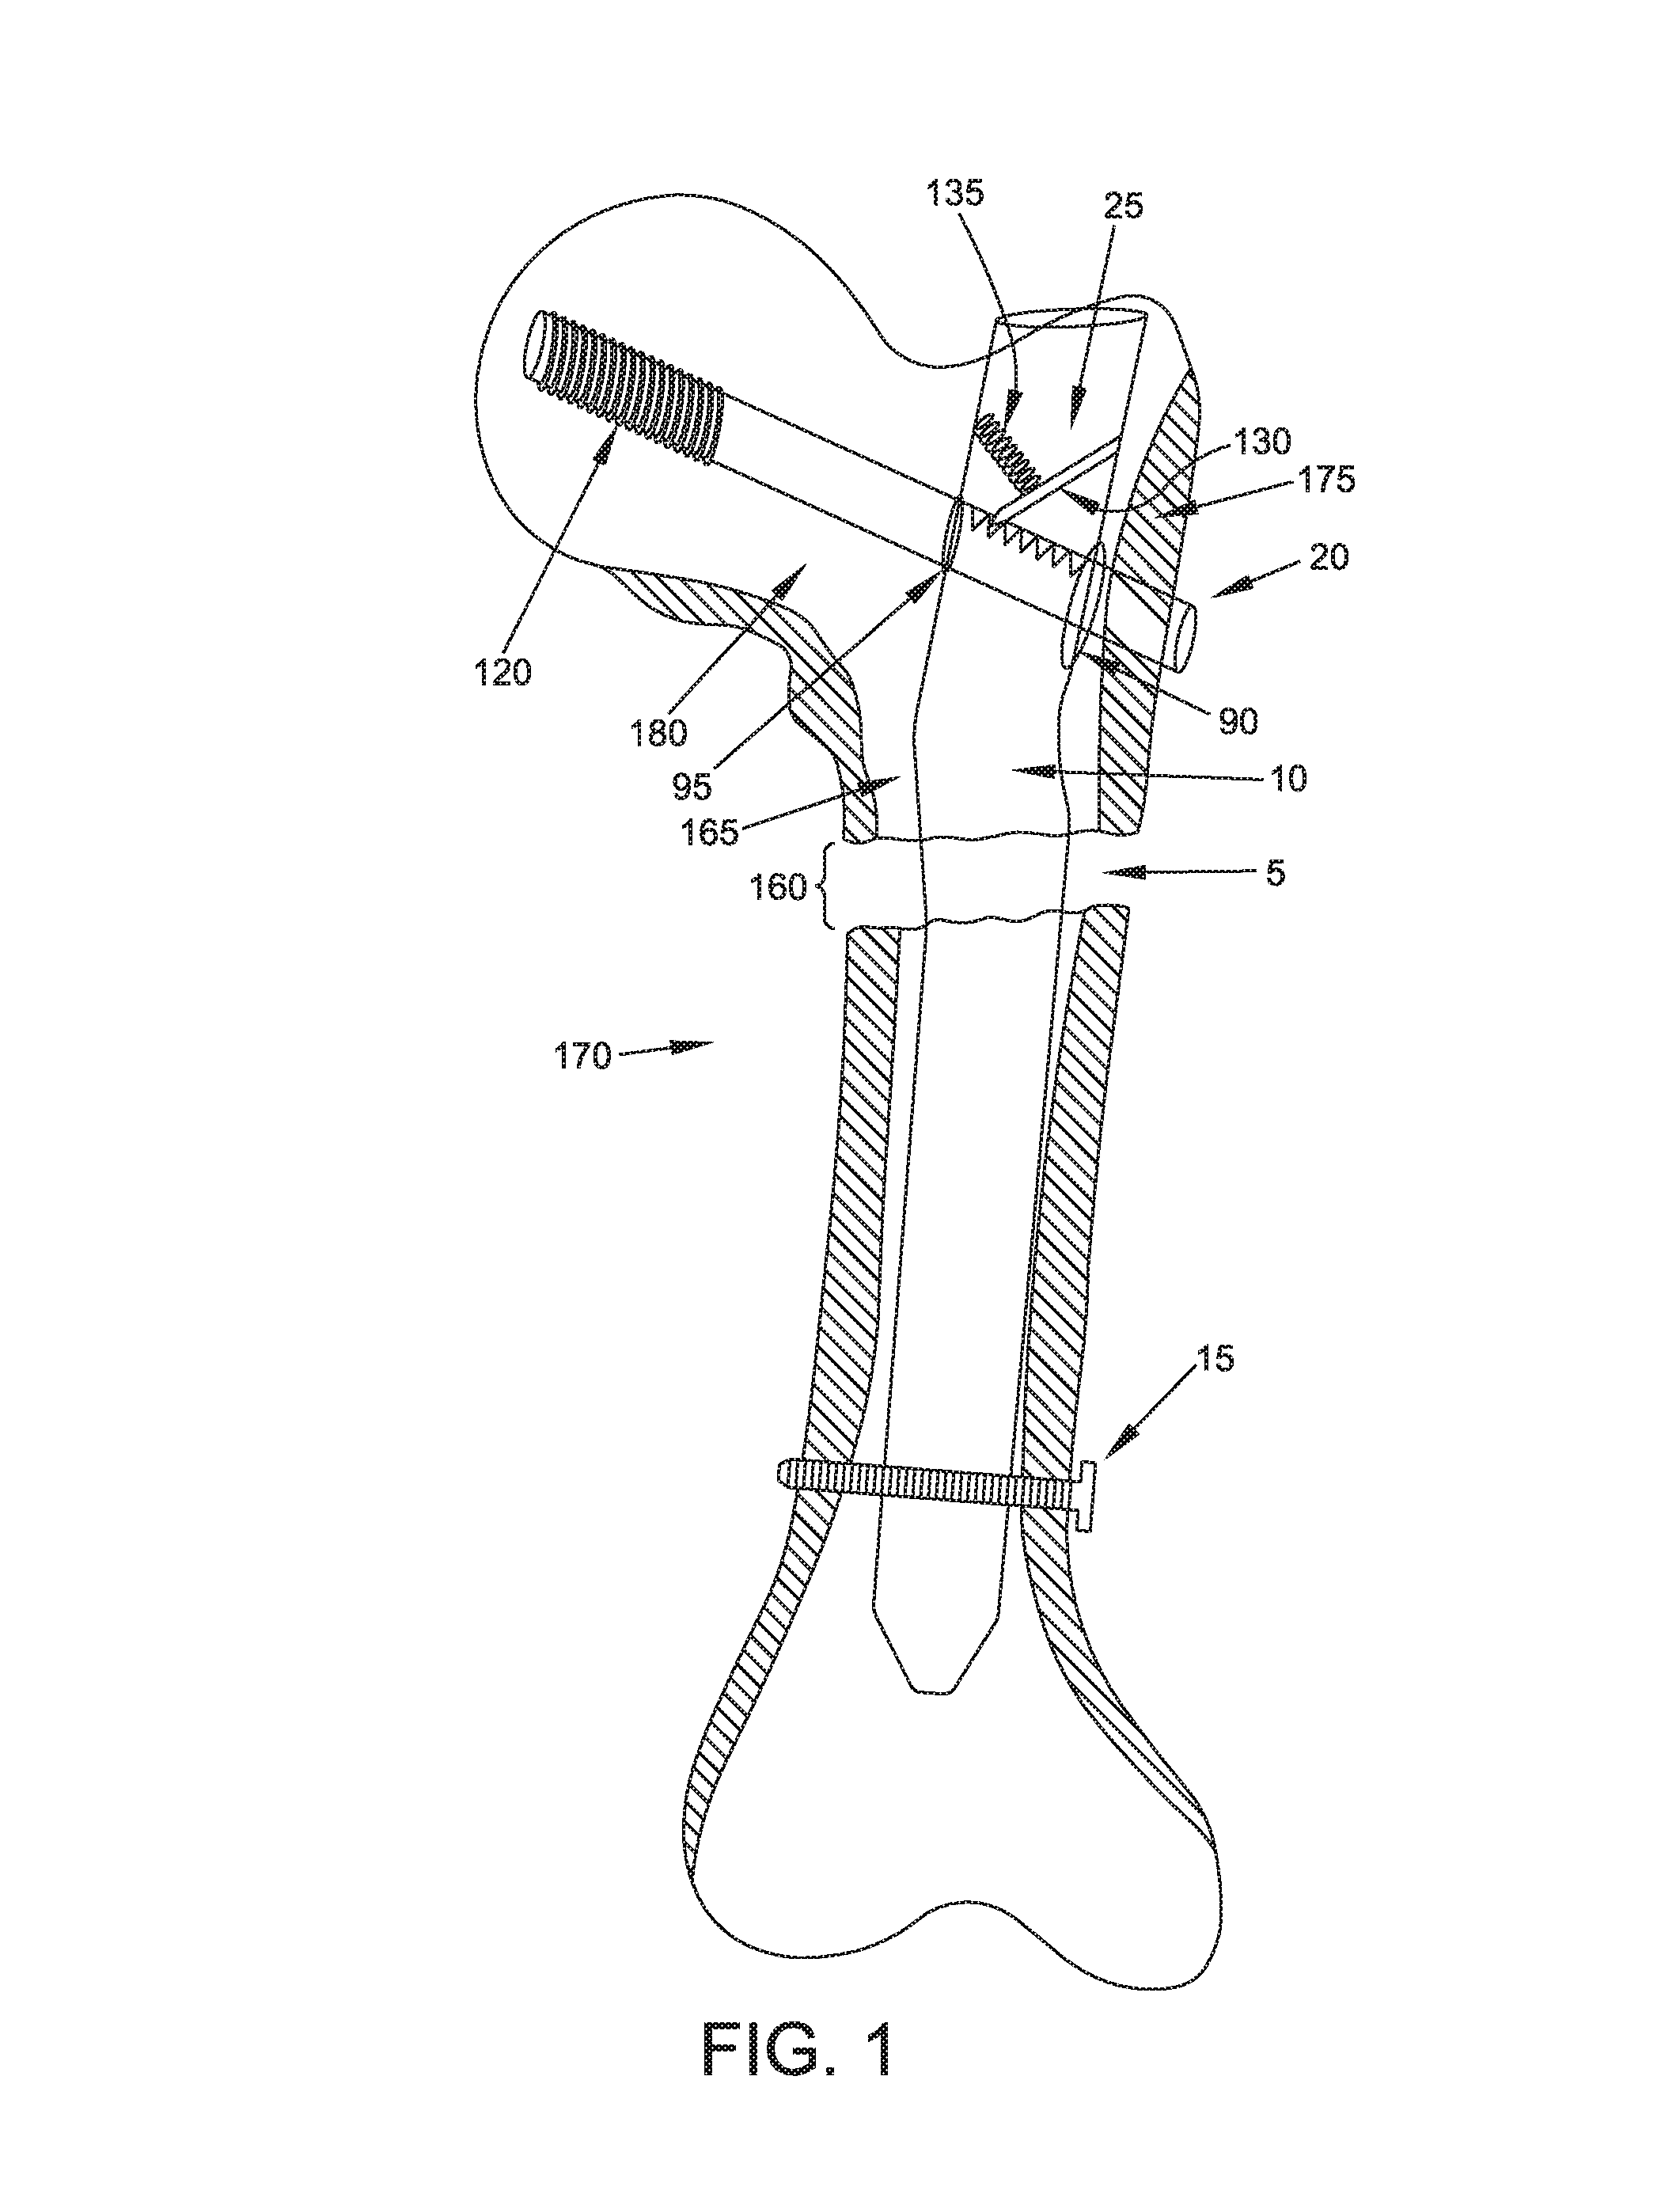 Interlocking intramedullary rod assembly for proximal femoral fractures, including unstable hip fractures